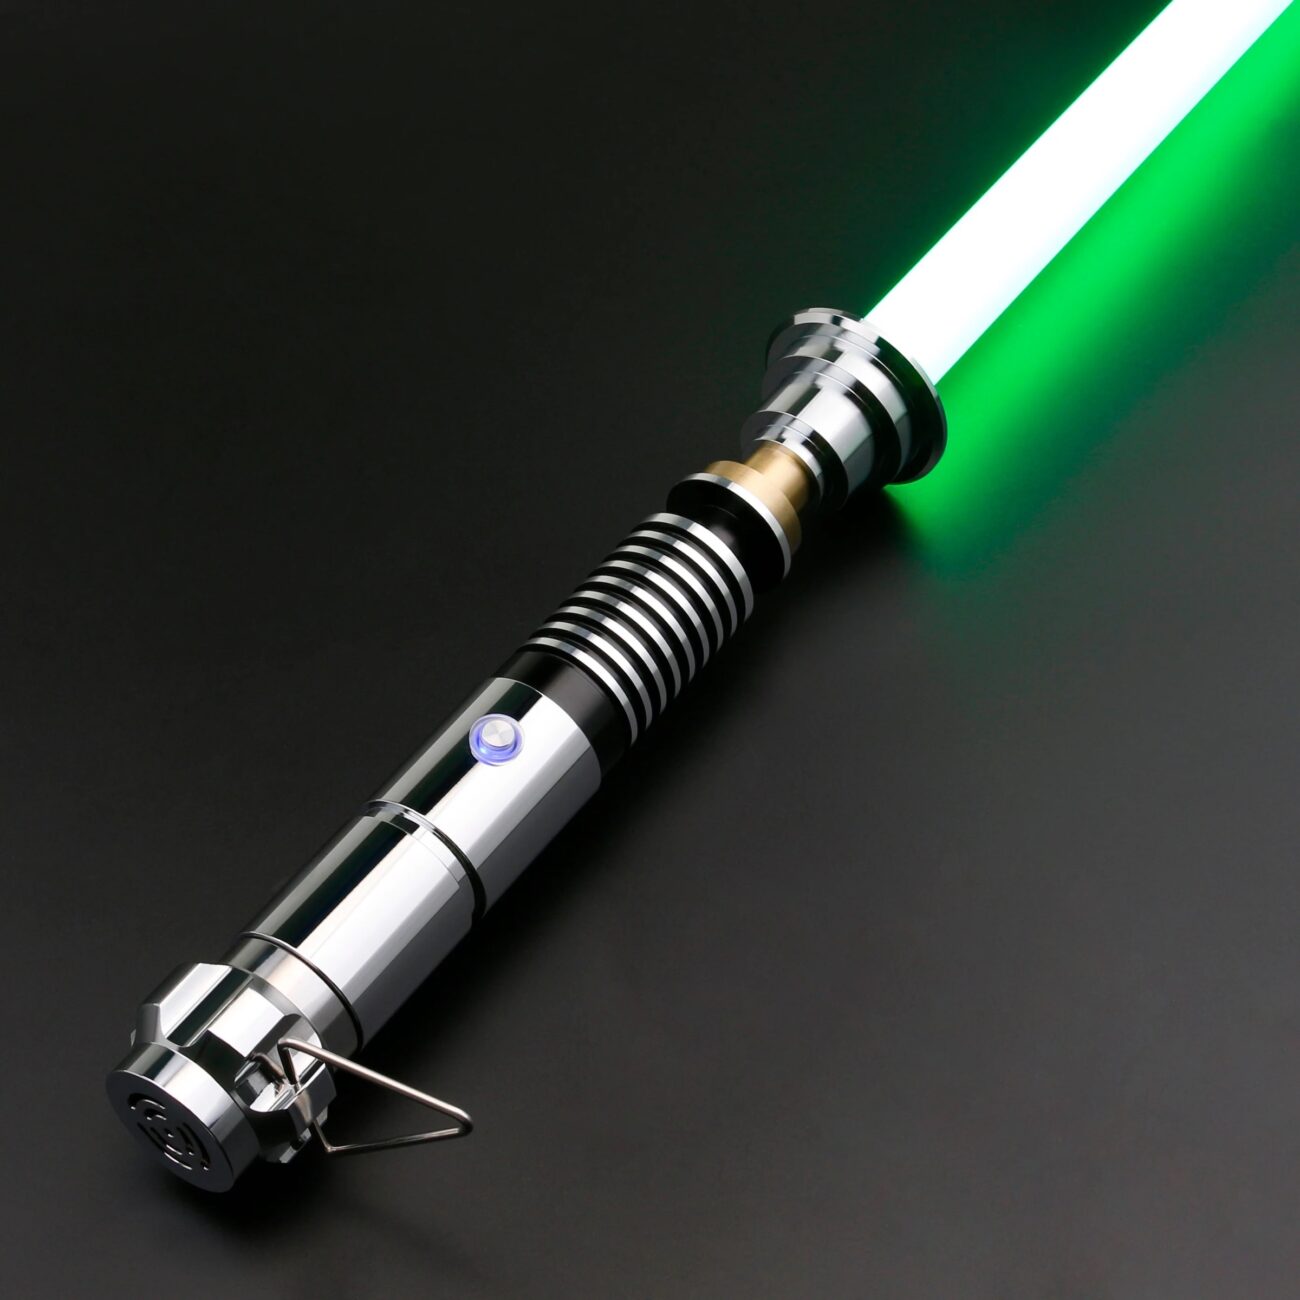 When it comes to finding the perfect gift for a science fiction aficionado, nothing quite matches the allure and excitement that a lightsaber can offer.